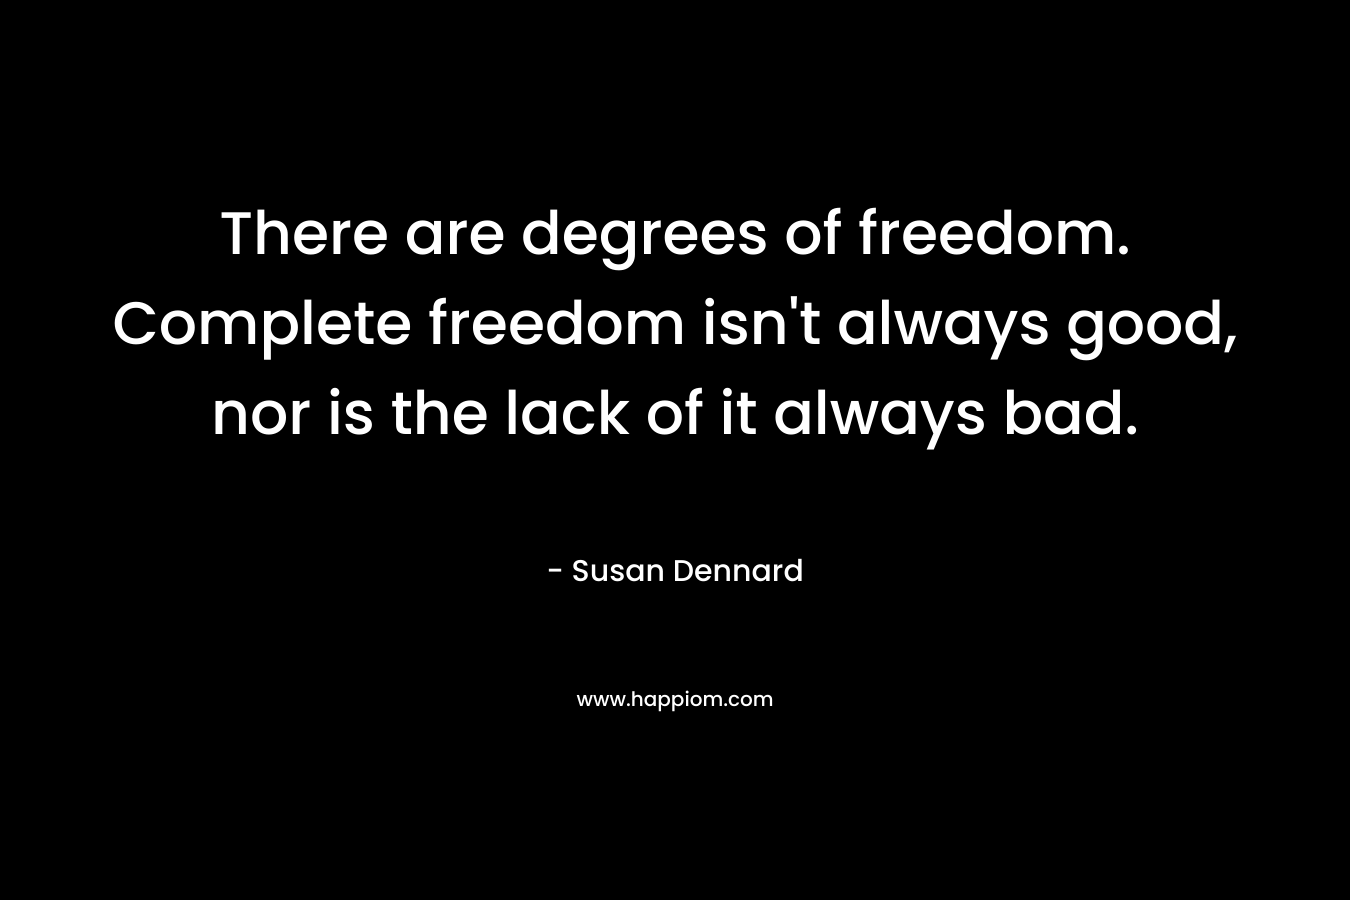 There are degrees of freedom. Complete freedom isn't always good, nor is the lack of it always bad.